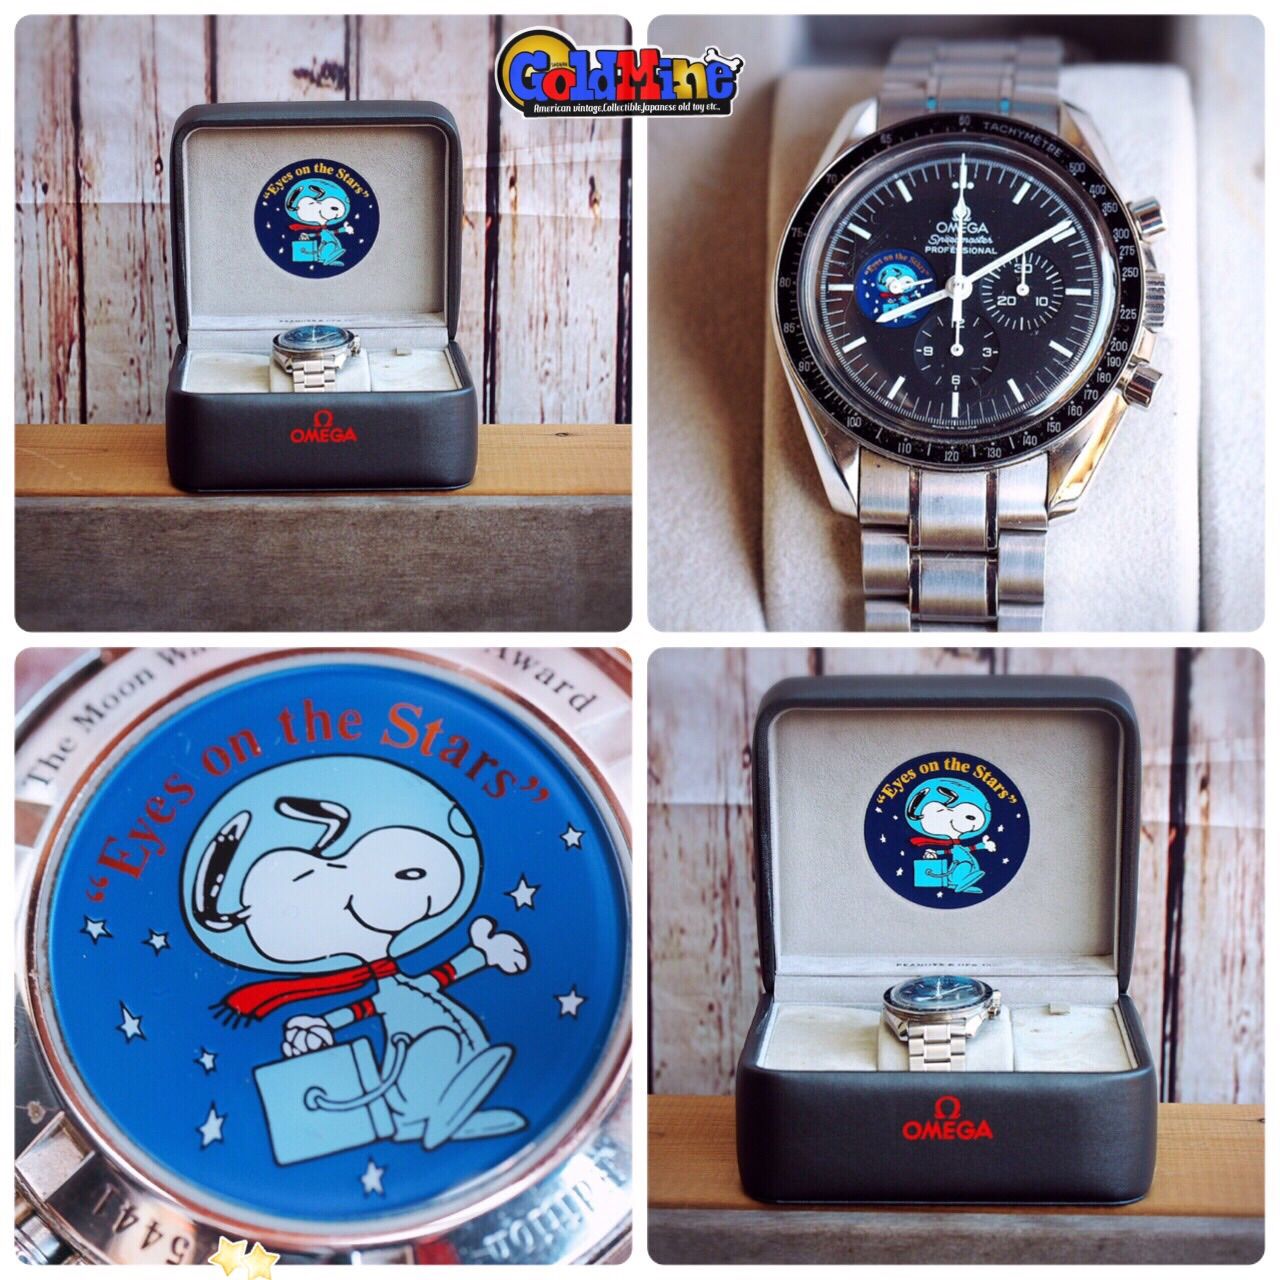 Omega スピードマスター スヌーピー 13 The Old Snoopy Collection